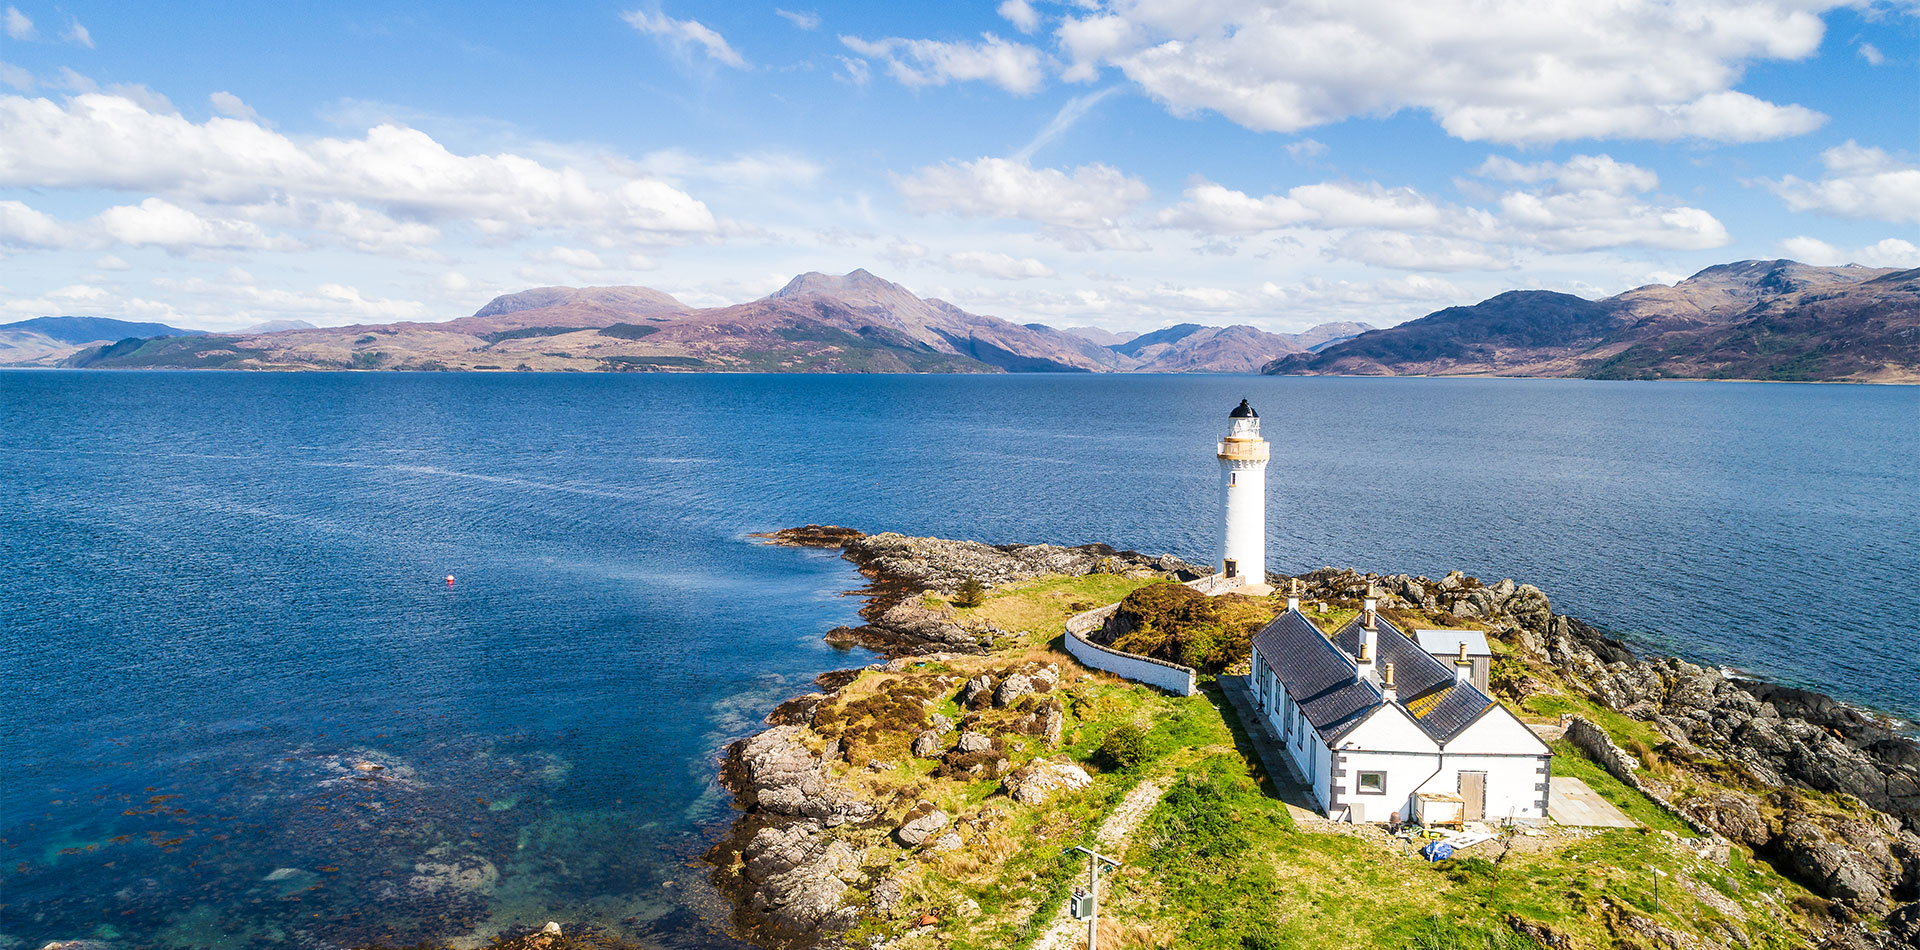 Ornsay Lighthouse in the Loch Hourn